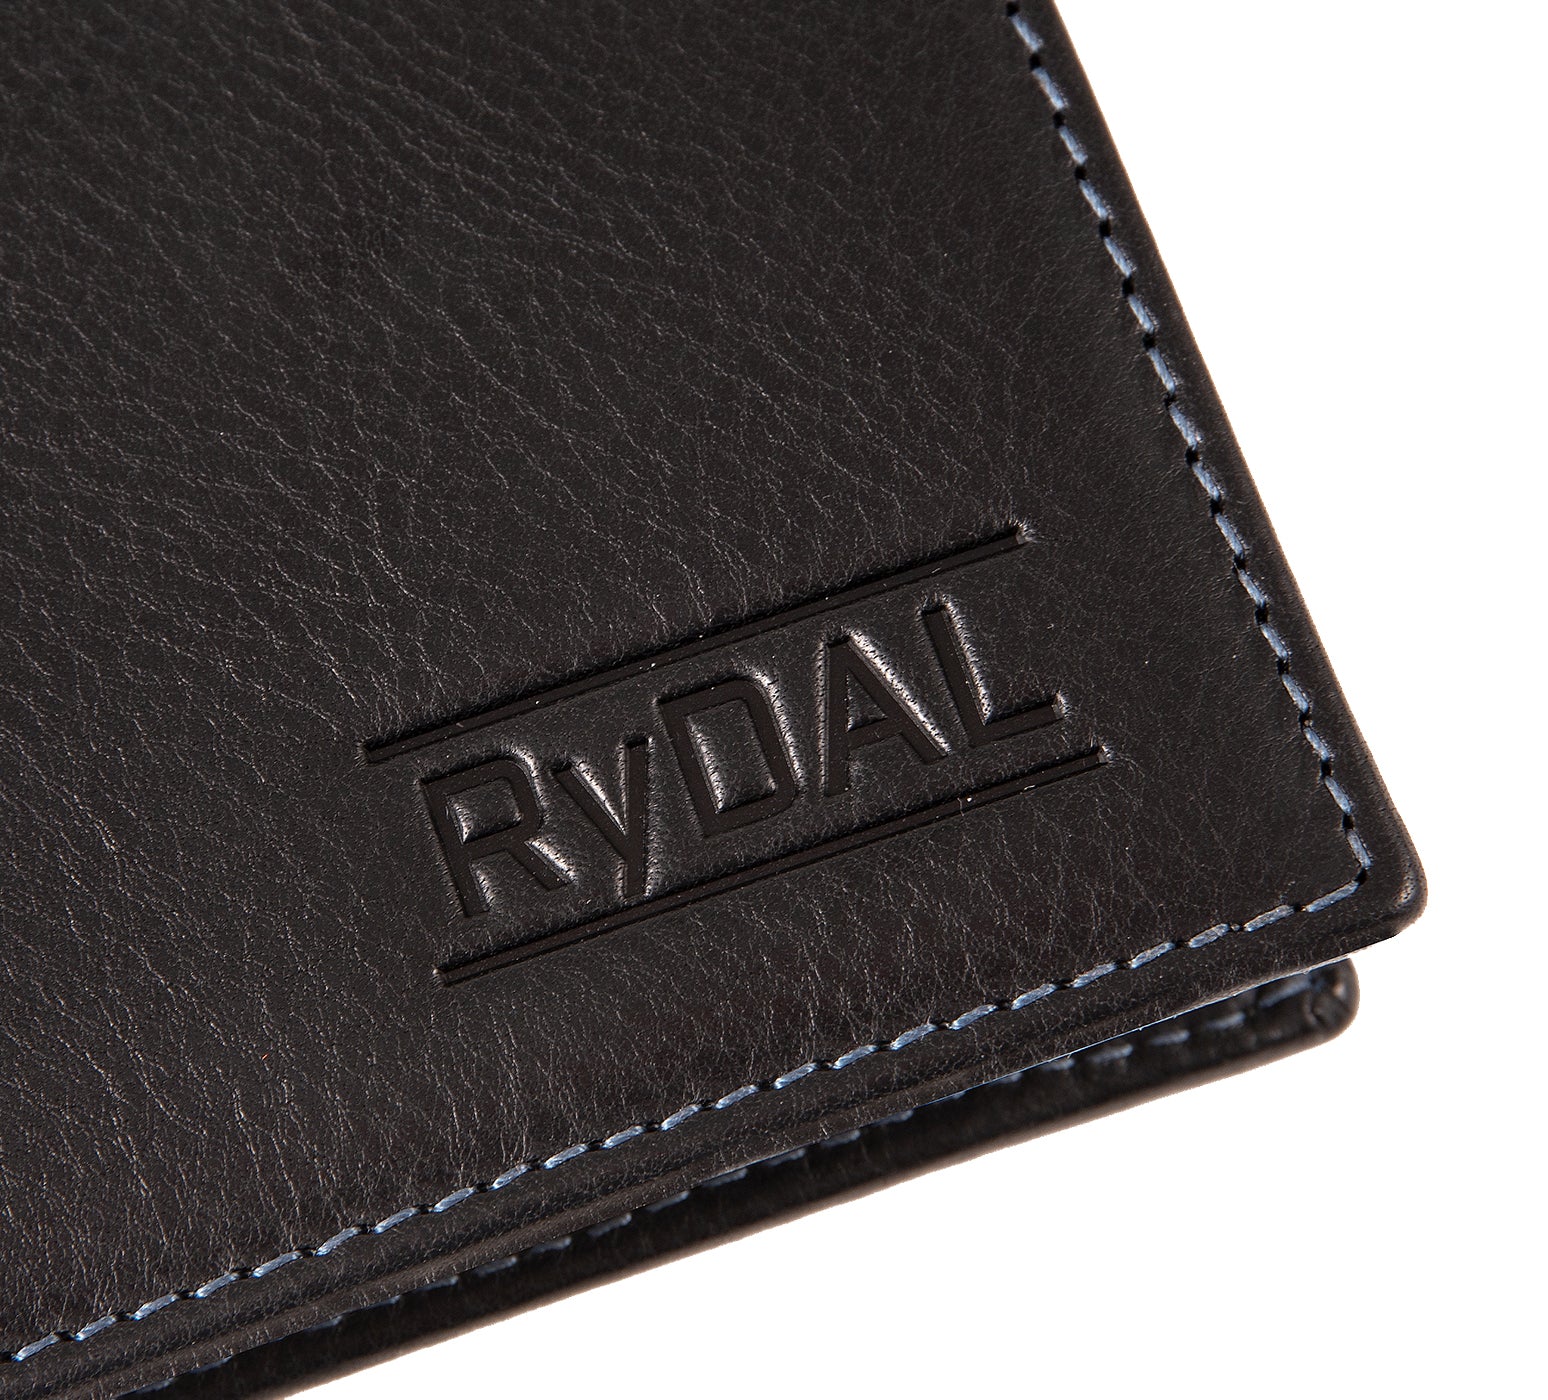 Mens Leather Wallet with Coin Pocket from Rydal in 'Black/Royal Blue' showing close up of logo.